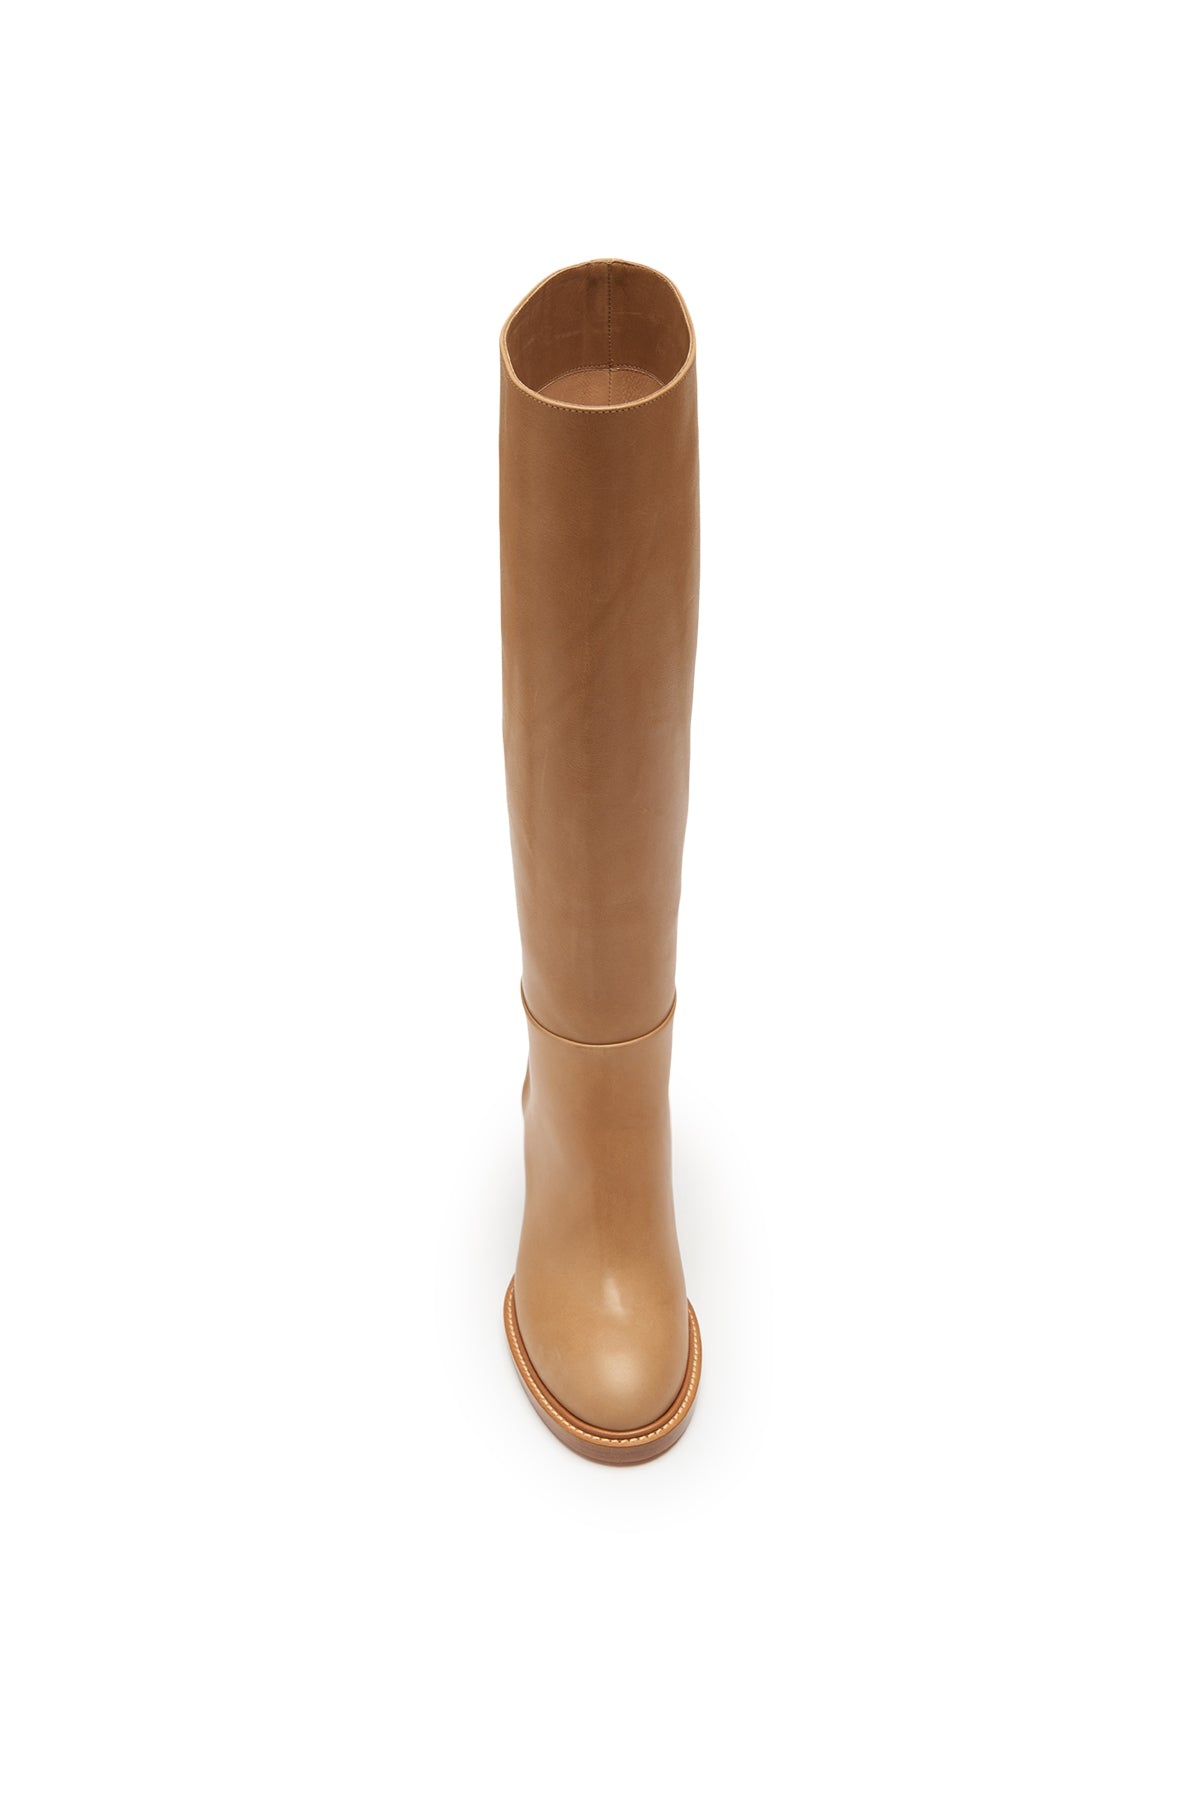 Bocca Knee High Boot in Dark Camel Leather - 4